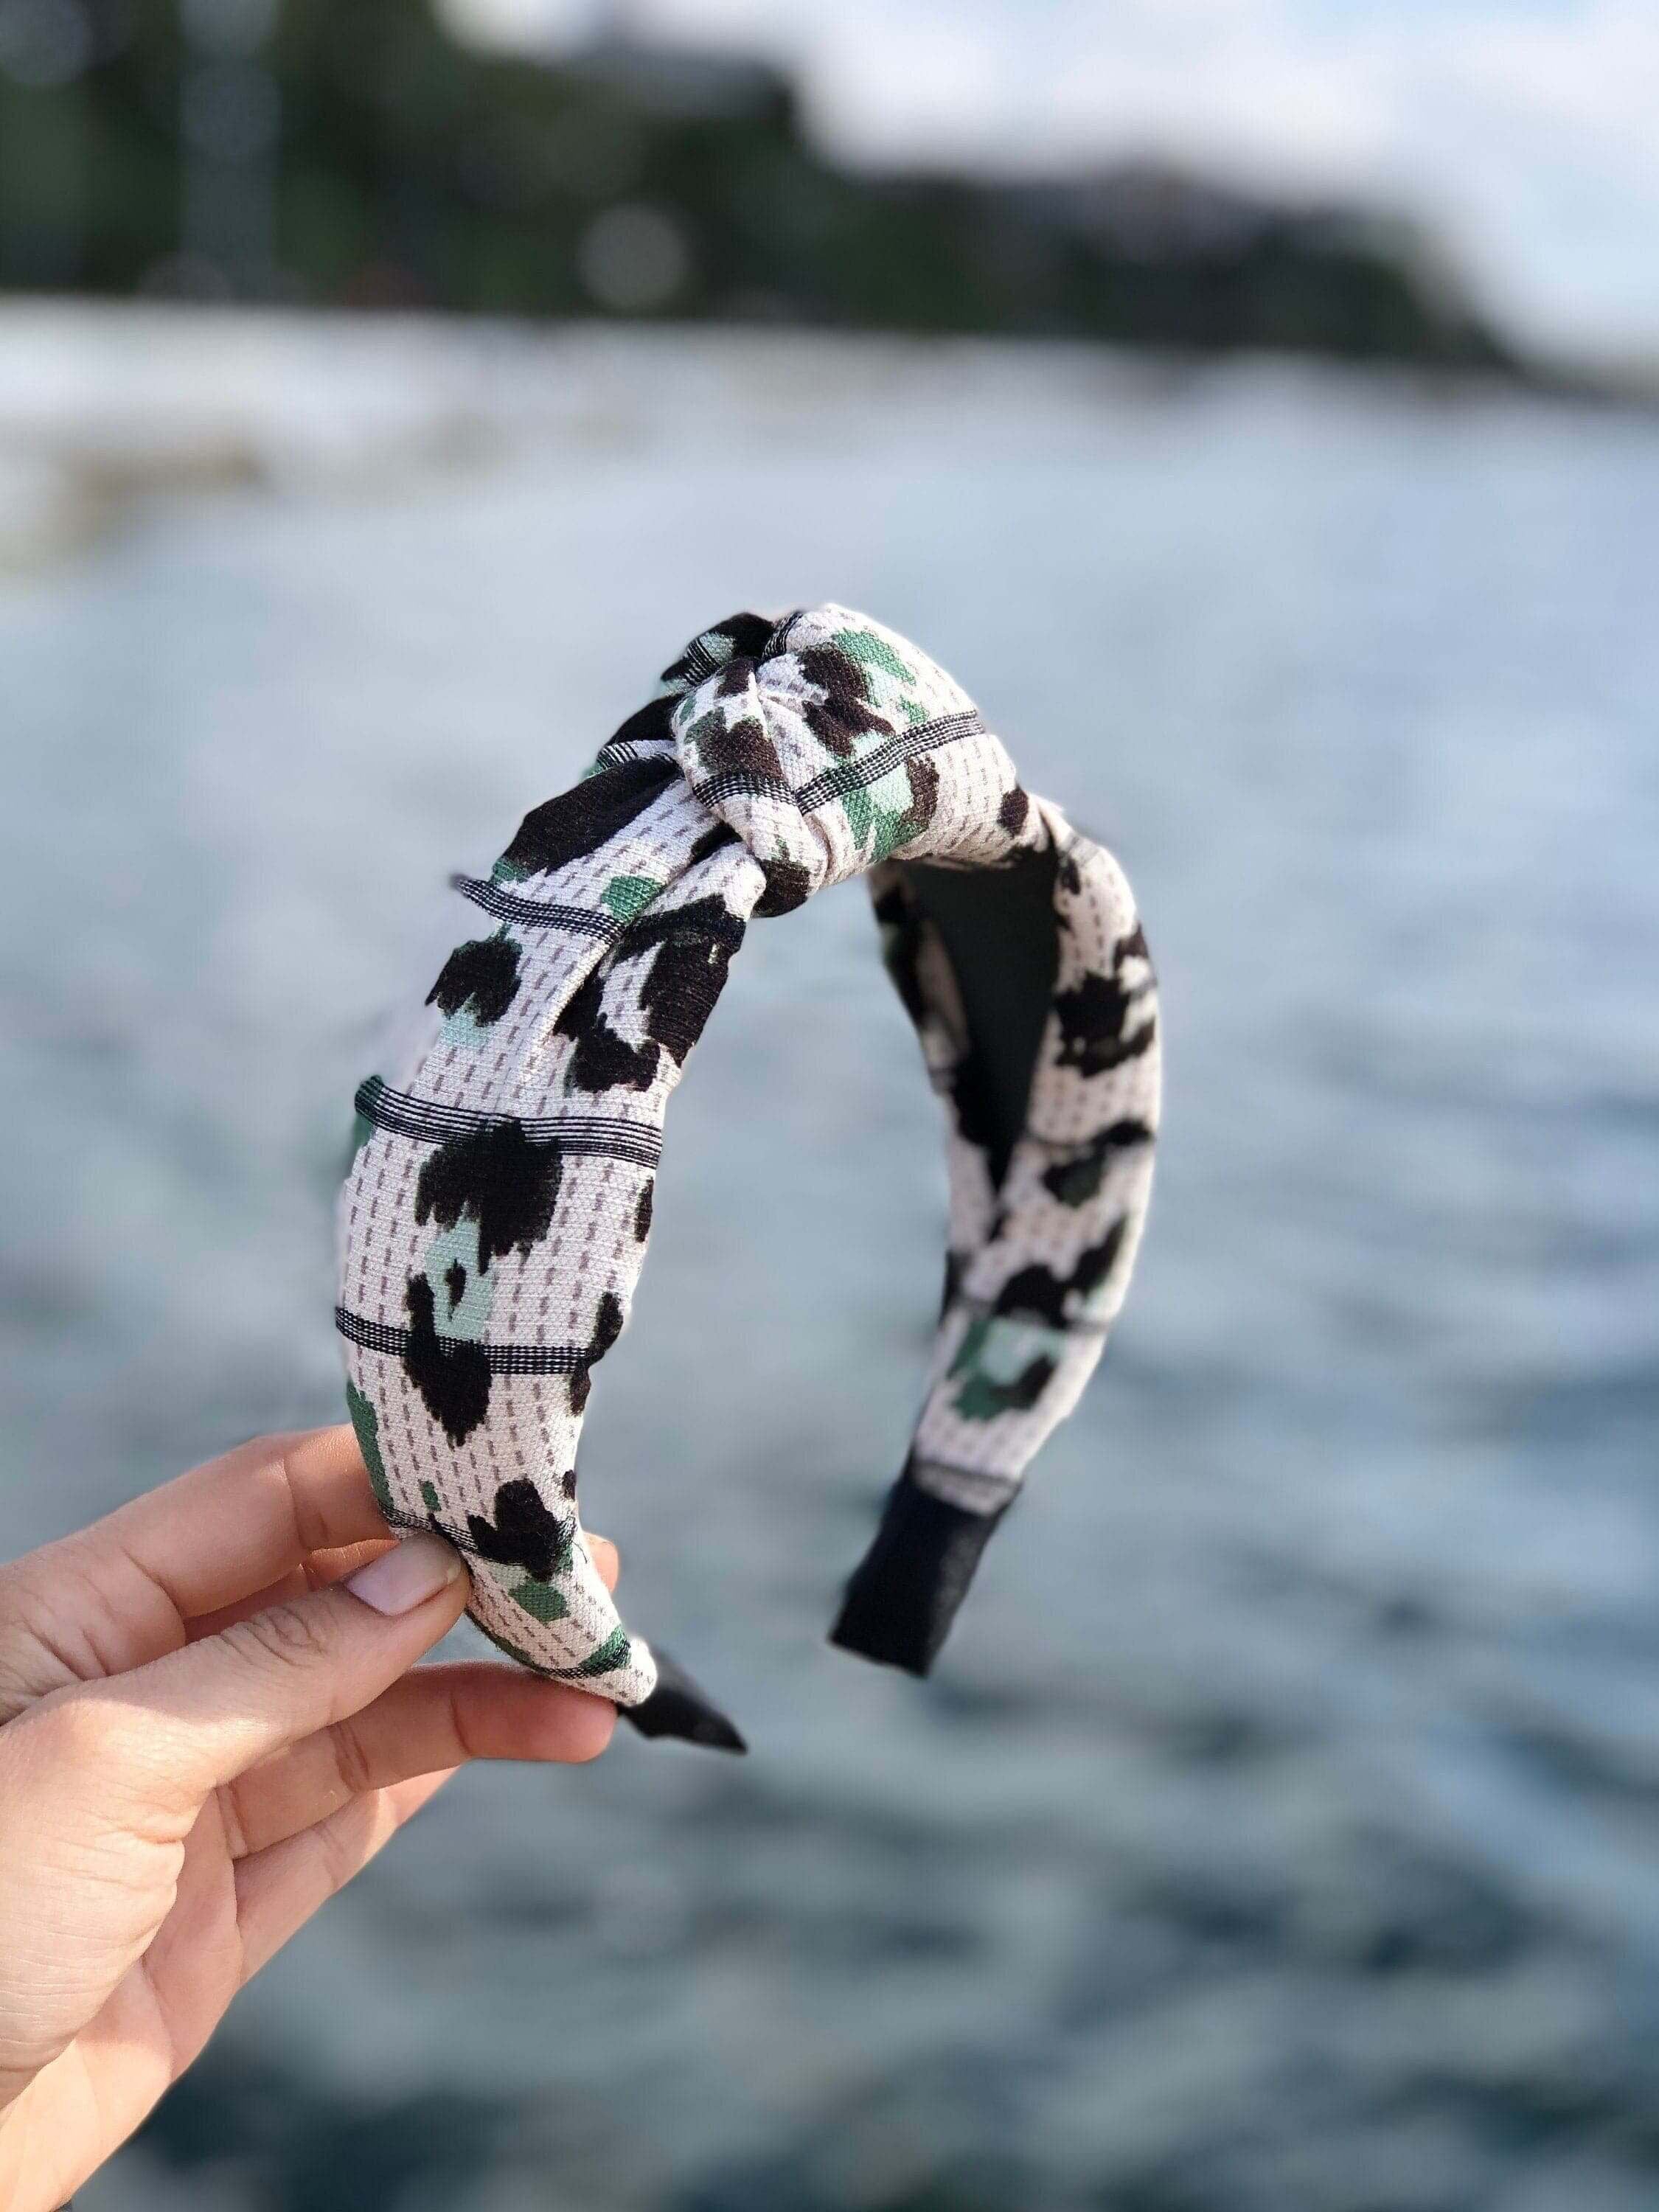 Stay trendy and fashionable all year round with these versatile and stylish Leopard Headband Accessories. Our collection of Leopard Headbands, Beige Green Black Headbands, Stylish Hairband, Wide Headbands, and Cotton Linen is sure to turn heads.